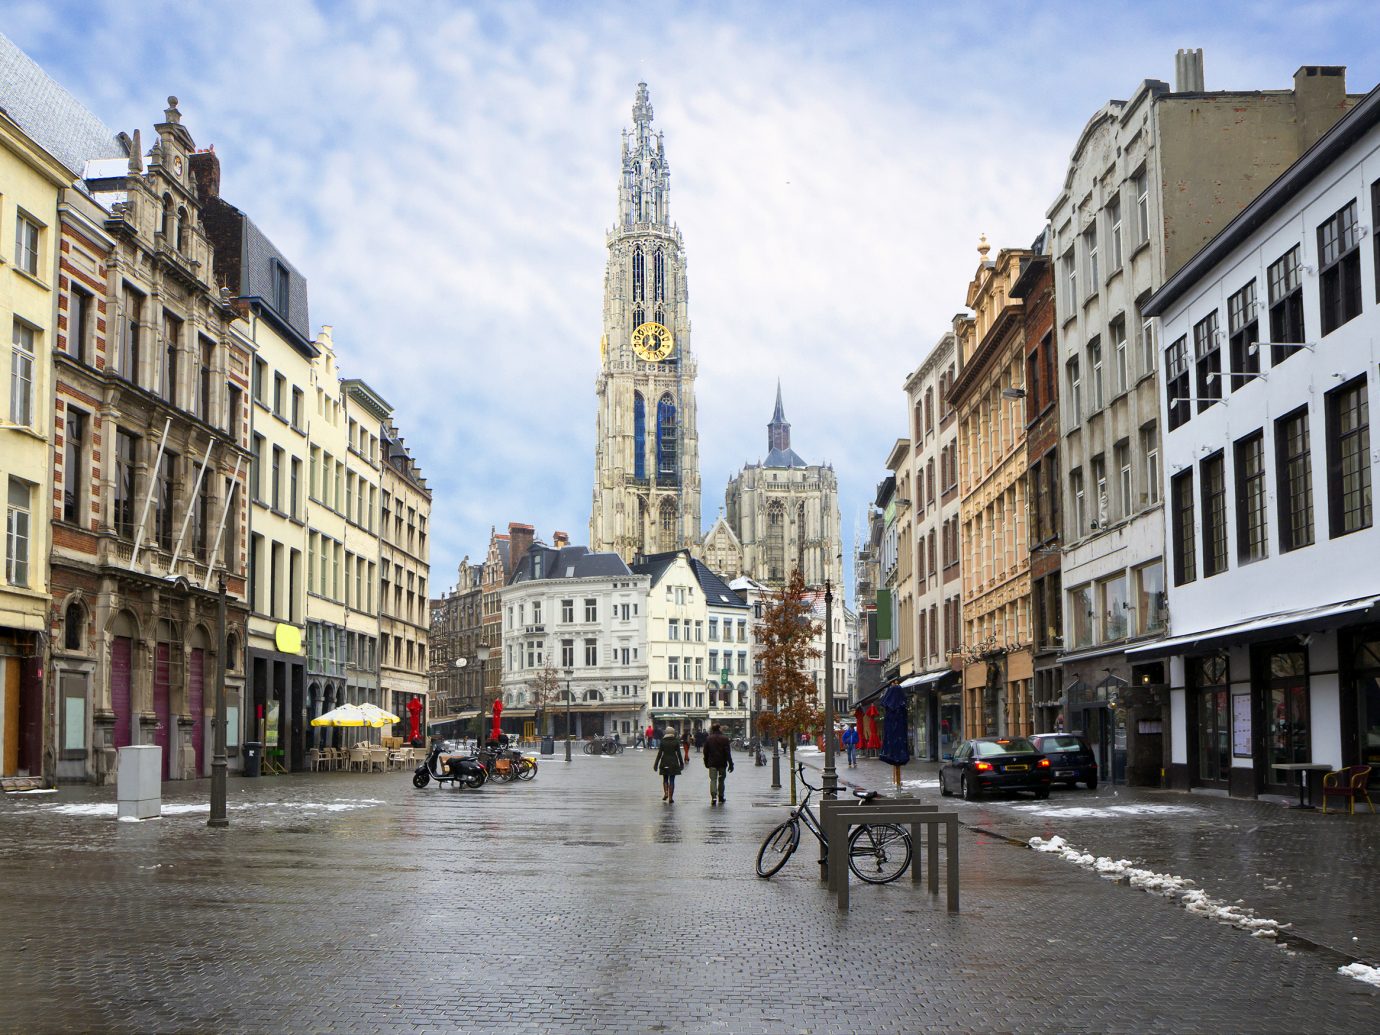 View of The Cathedral of our lady in Antwerp